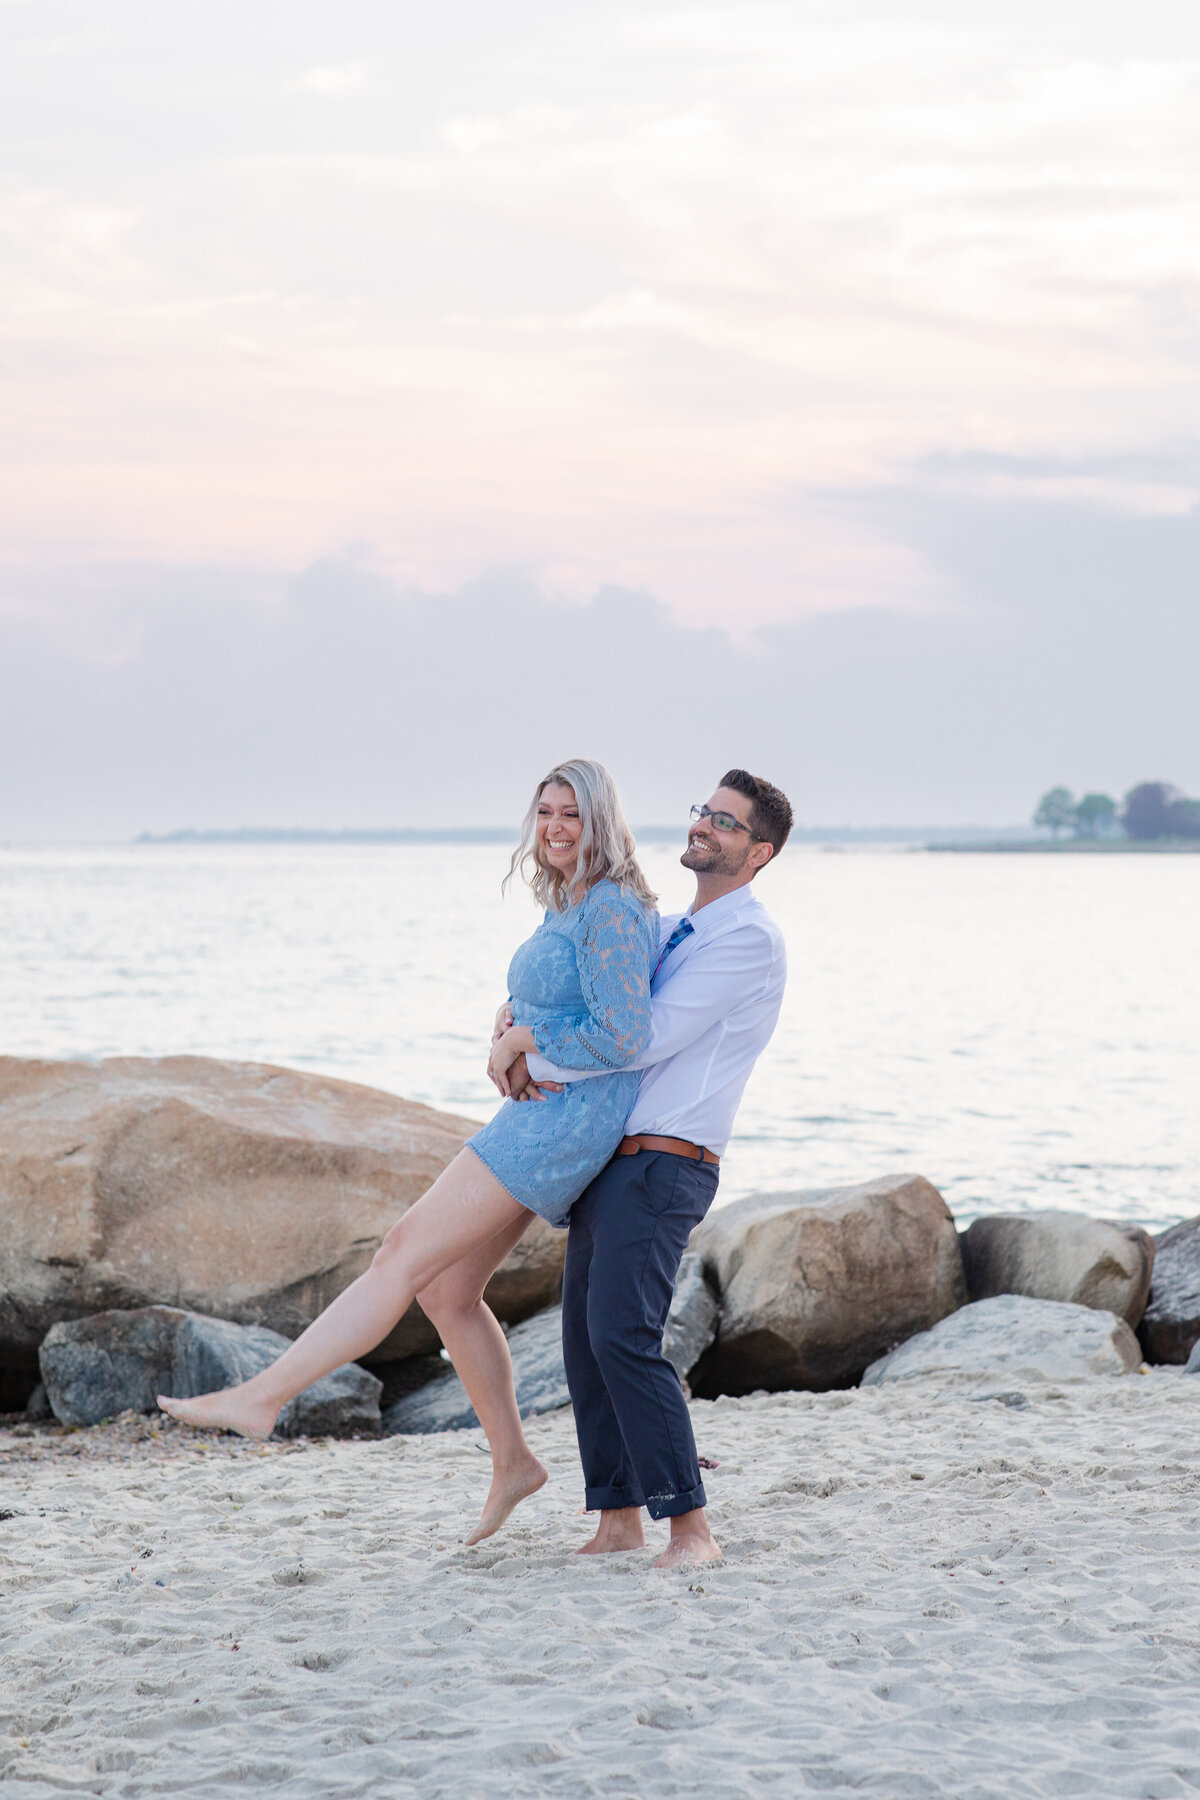 Harkness-Memorial-Park-engagement-session-Kelly-Pomeroy-Photography-Marissa-Mike--246